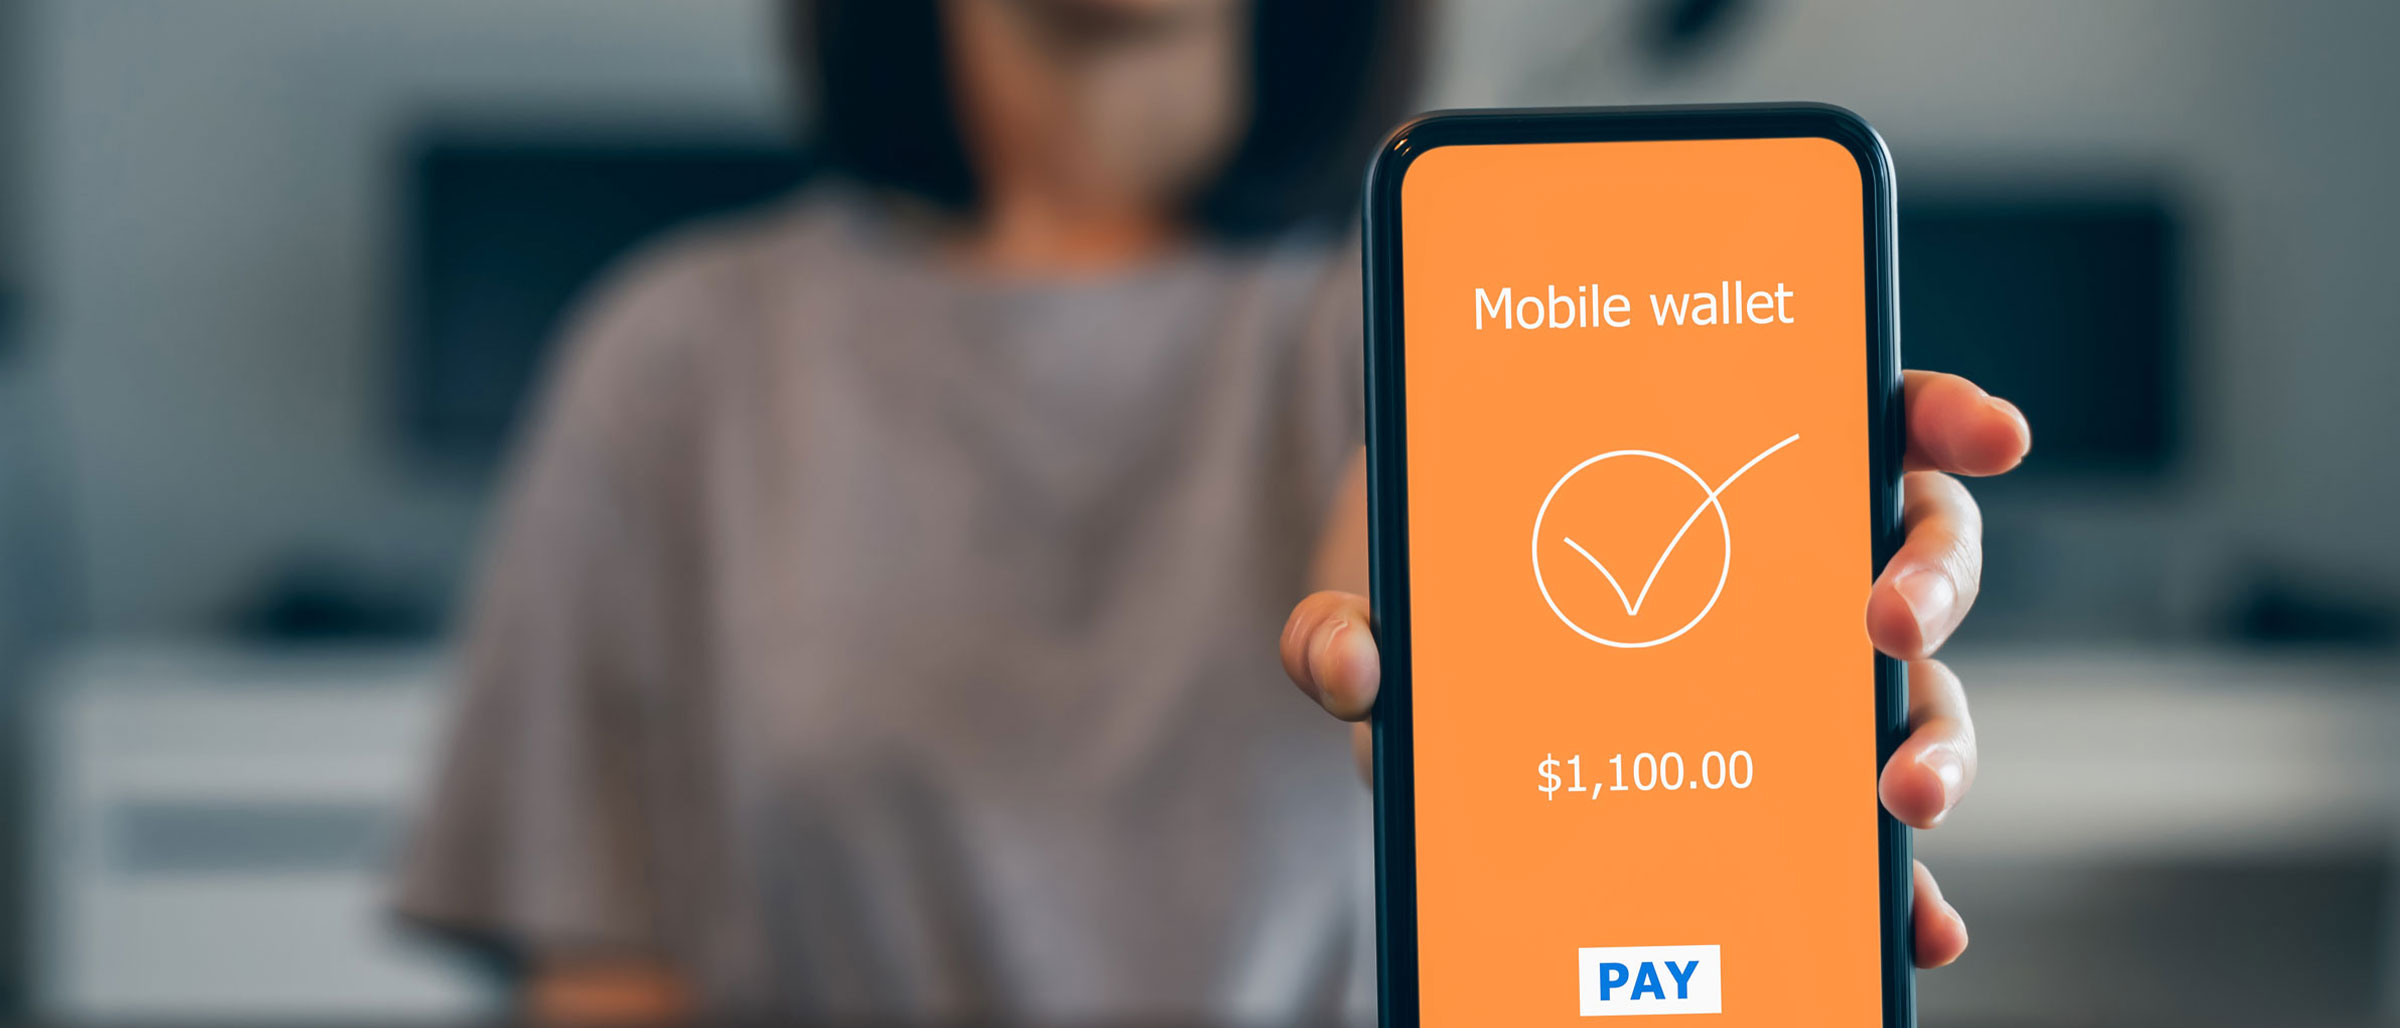 Mobile Wallet with $1,100 transfer on screen